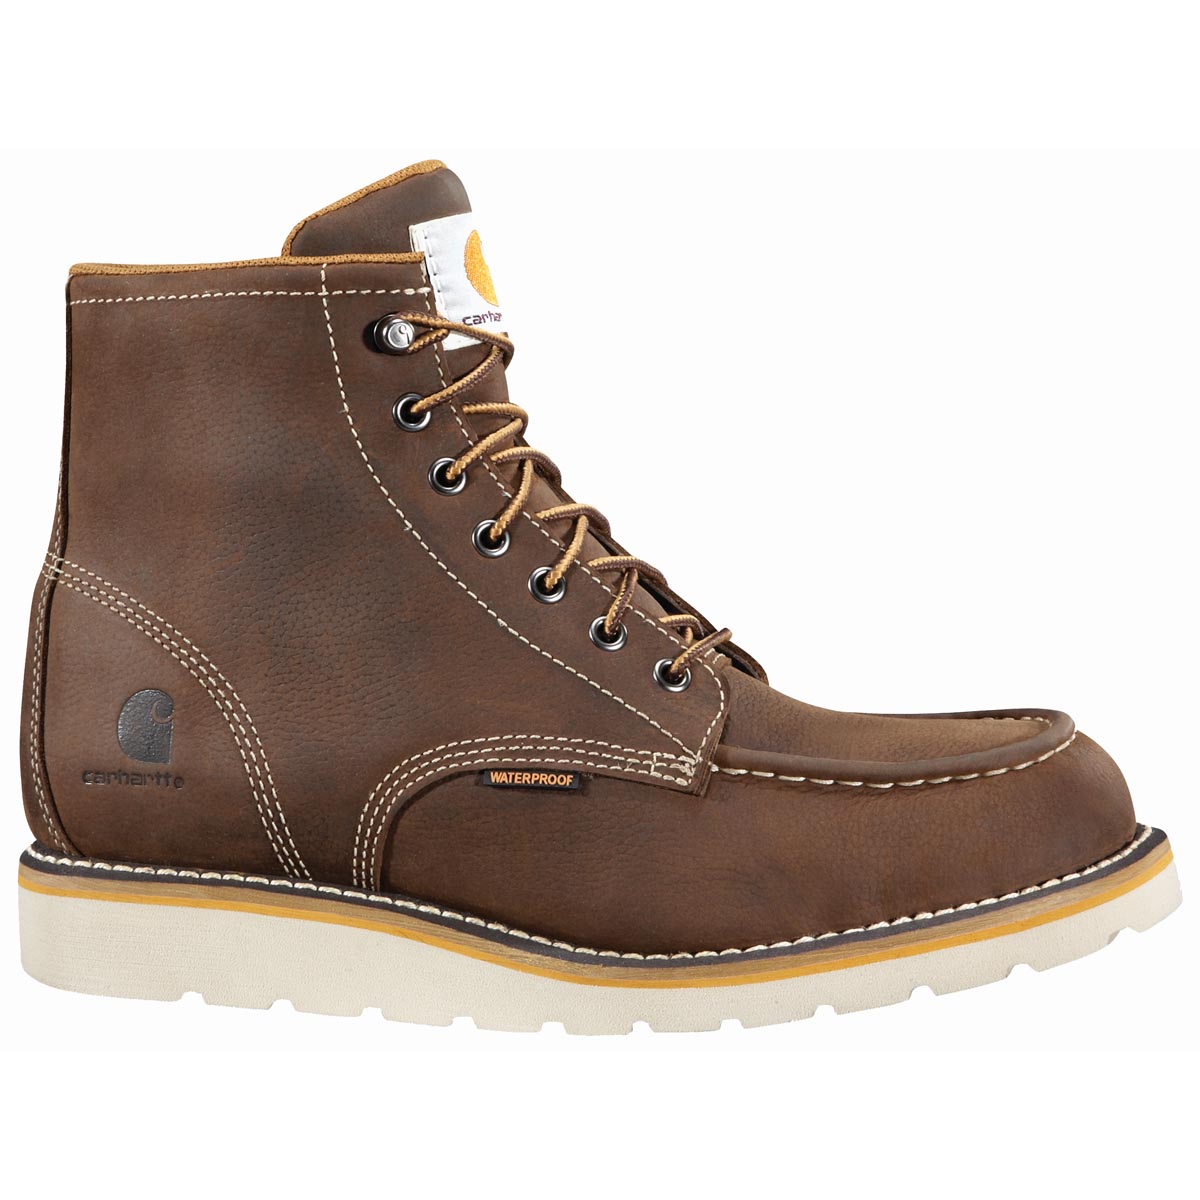 Carhartt Men's 6 Inch Brown Waterproof Wedge Boot Non Safety Toe